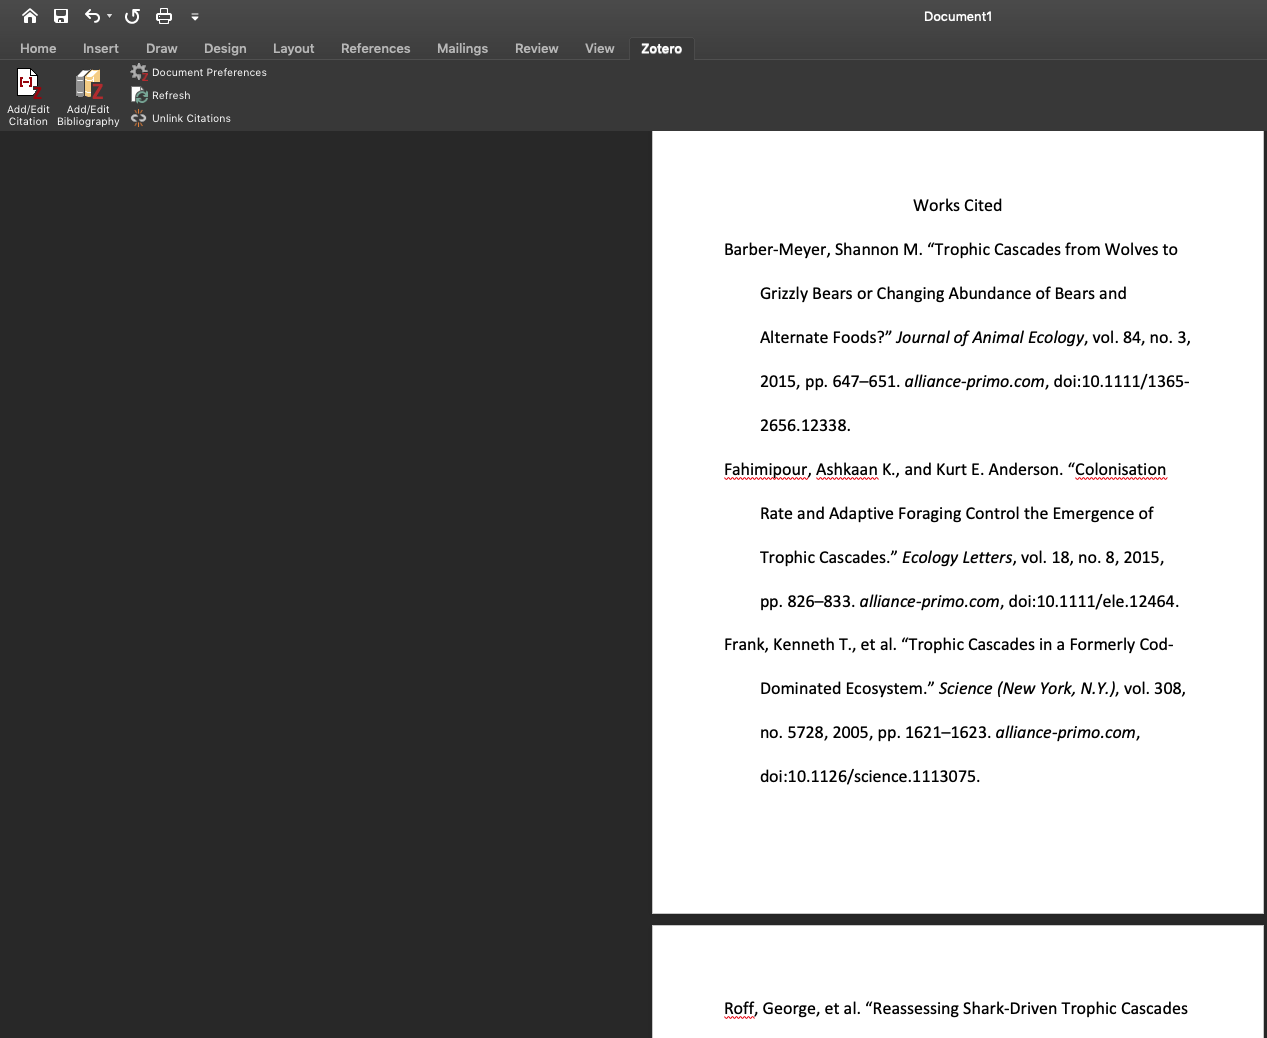 This image shows the same word document with a formatted bibliography for several sources added.